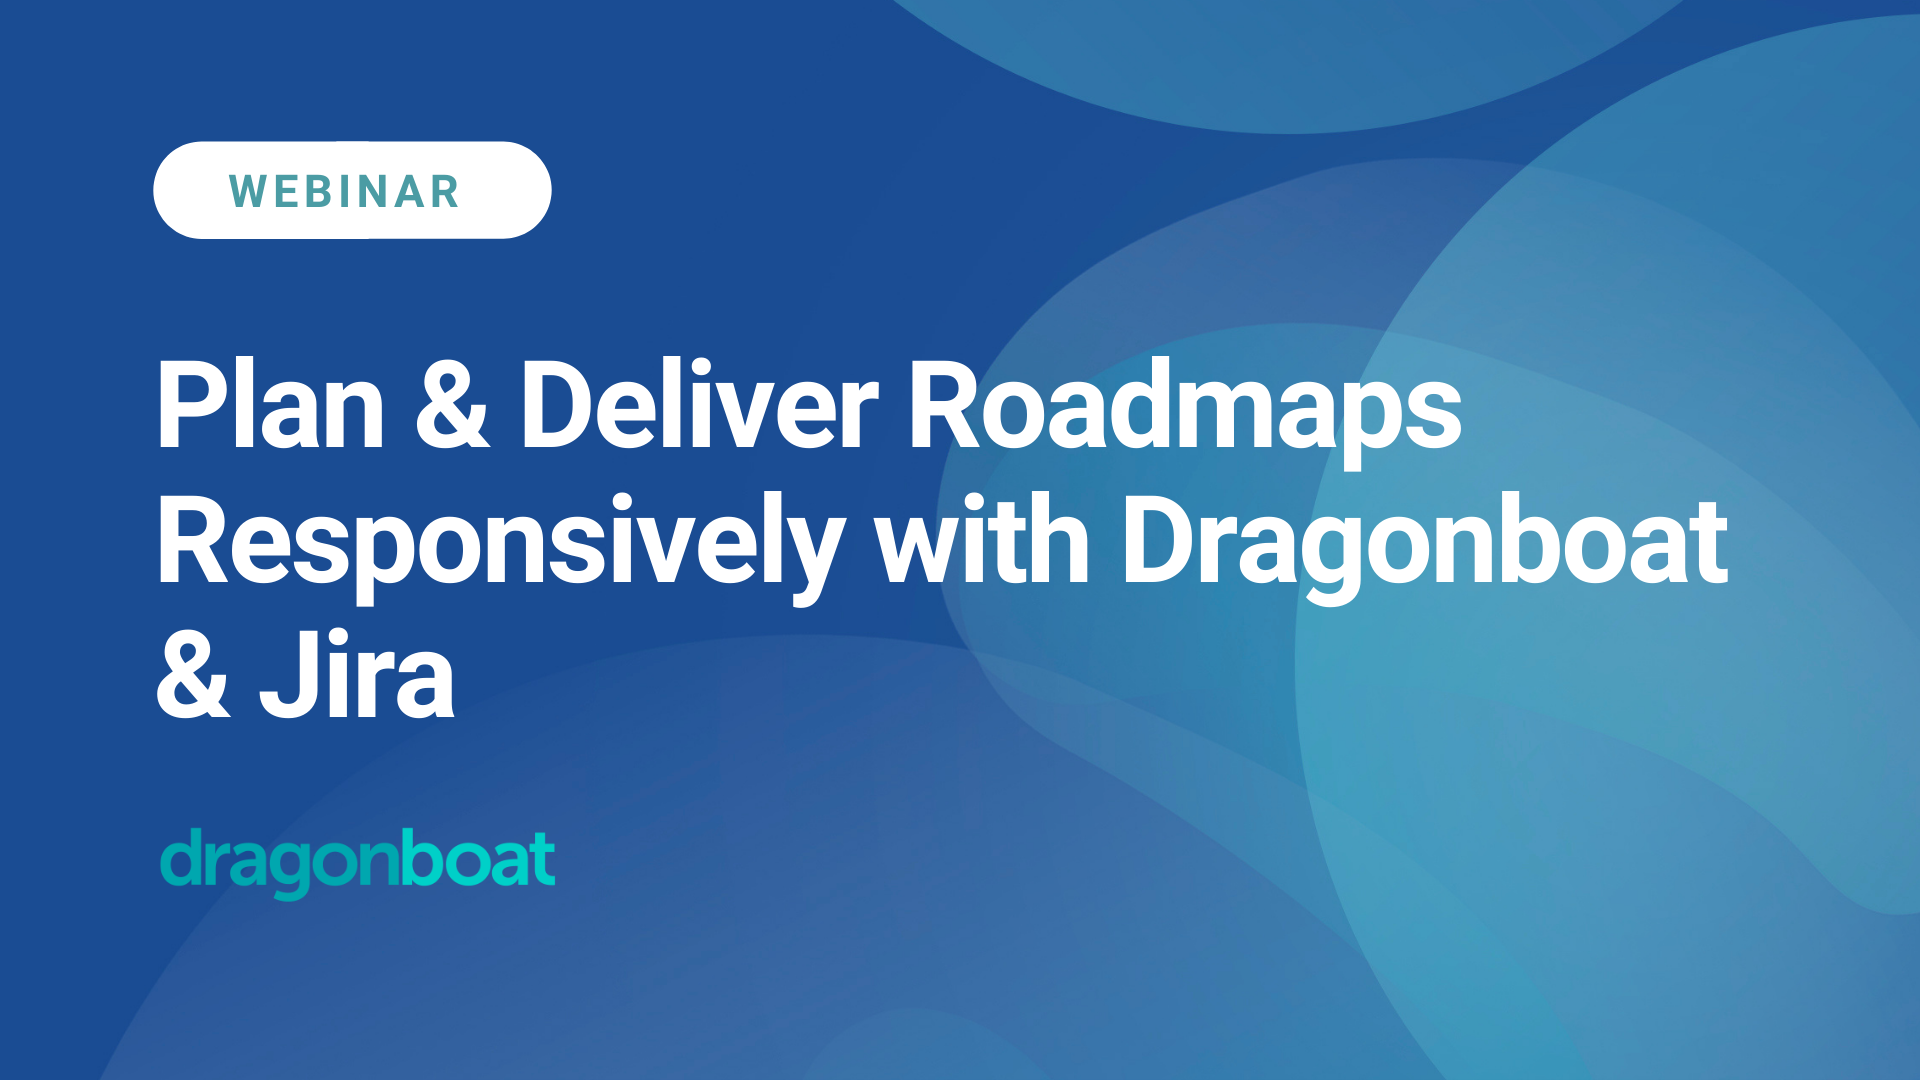 Plan & Deliver Roadmaps Responsively with Dragonboat & Jira